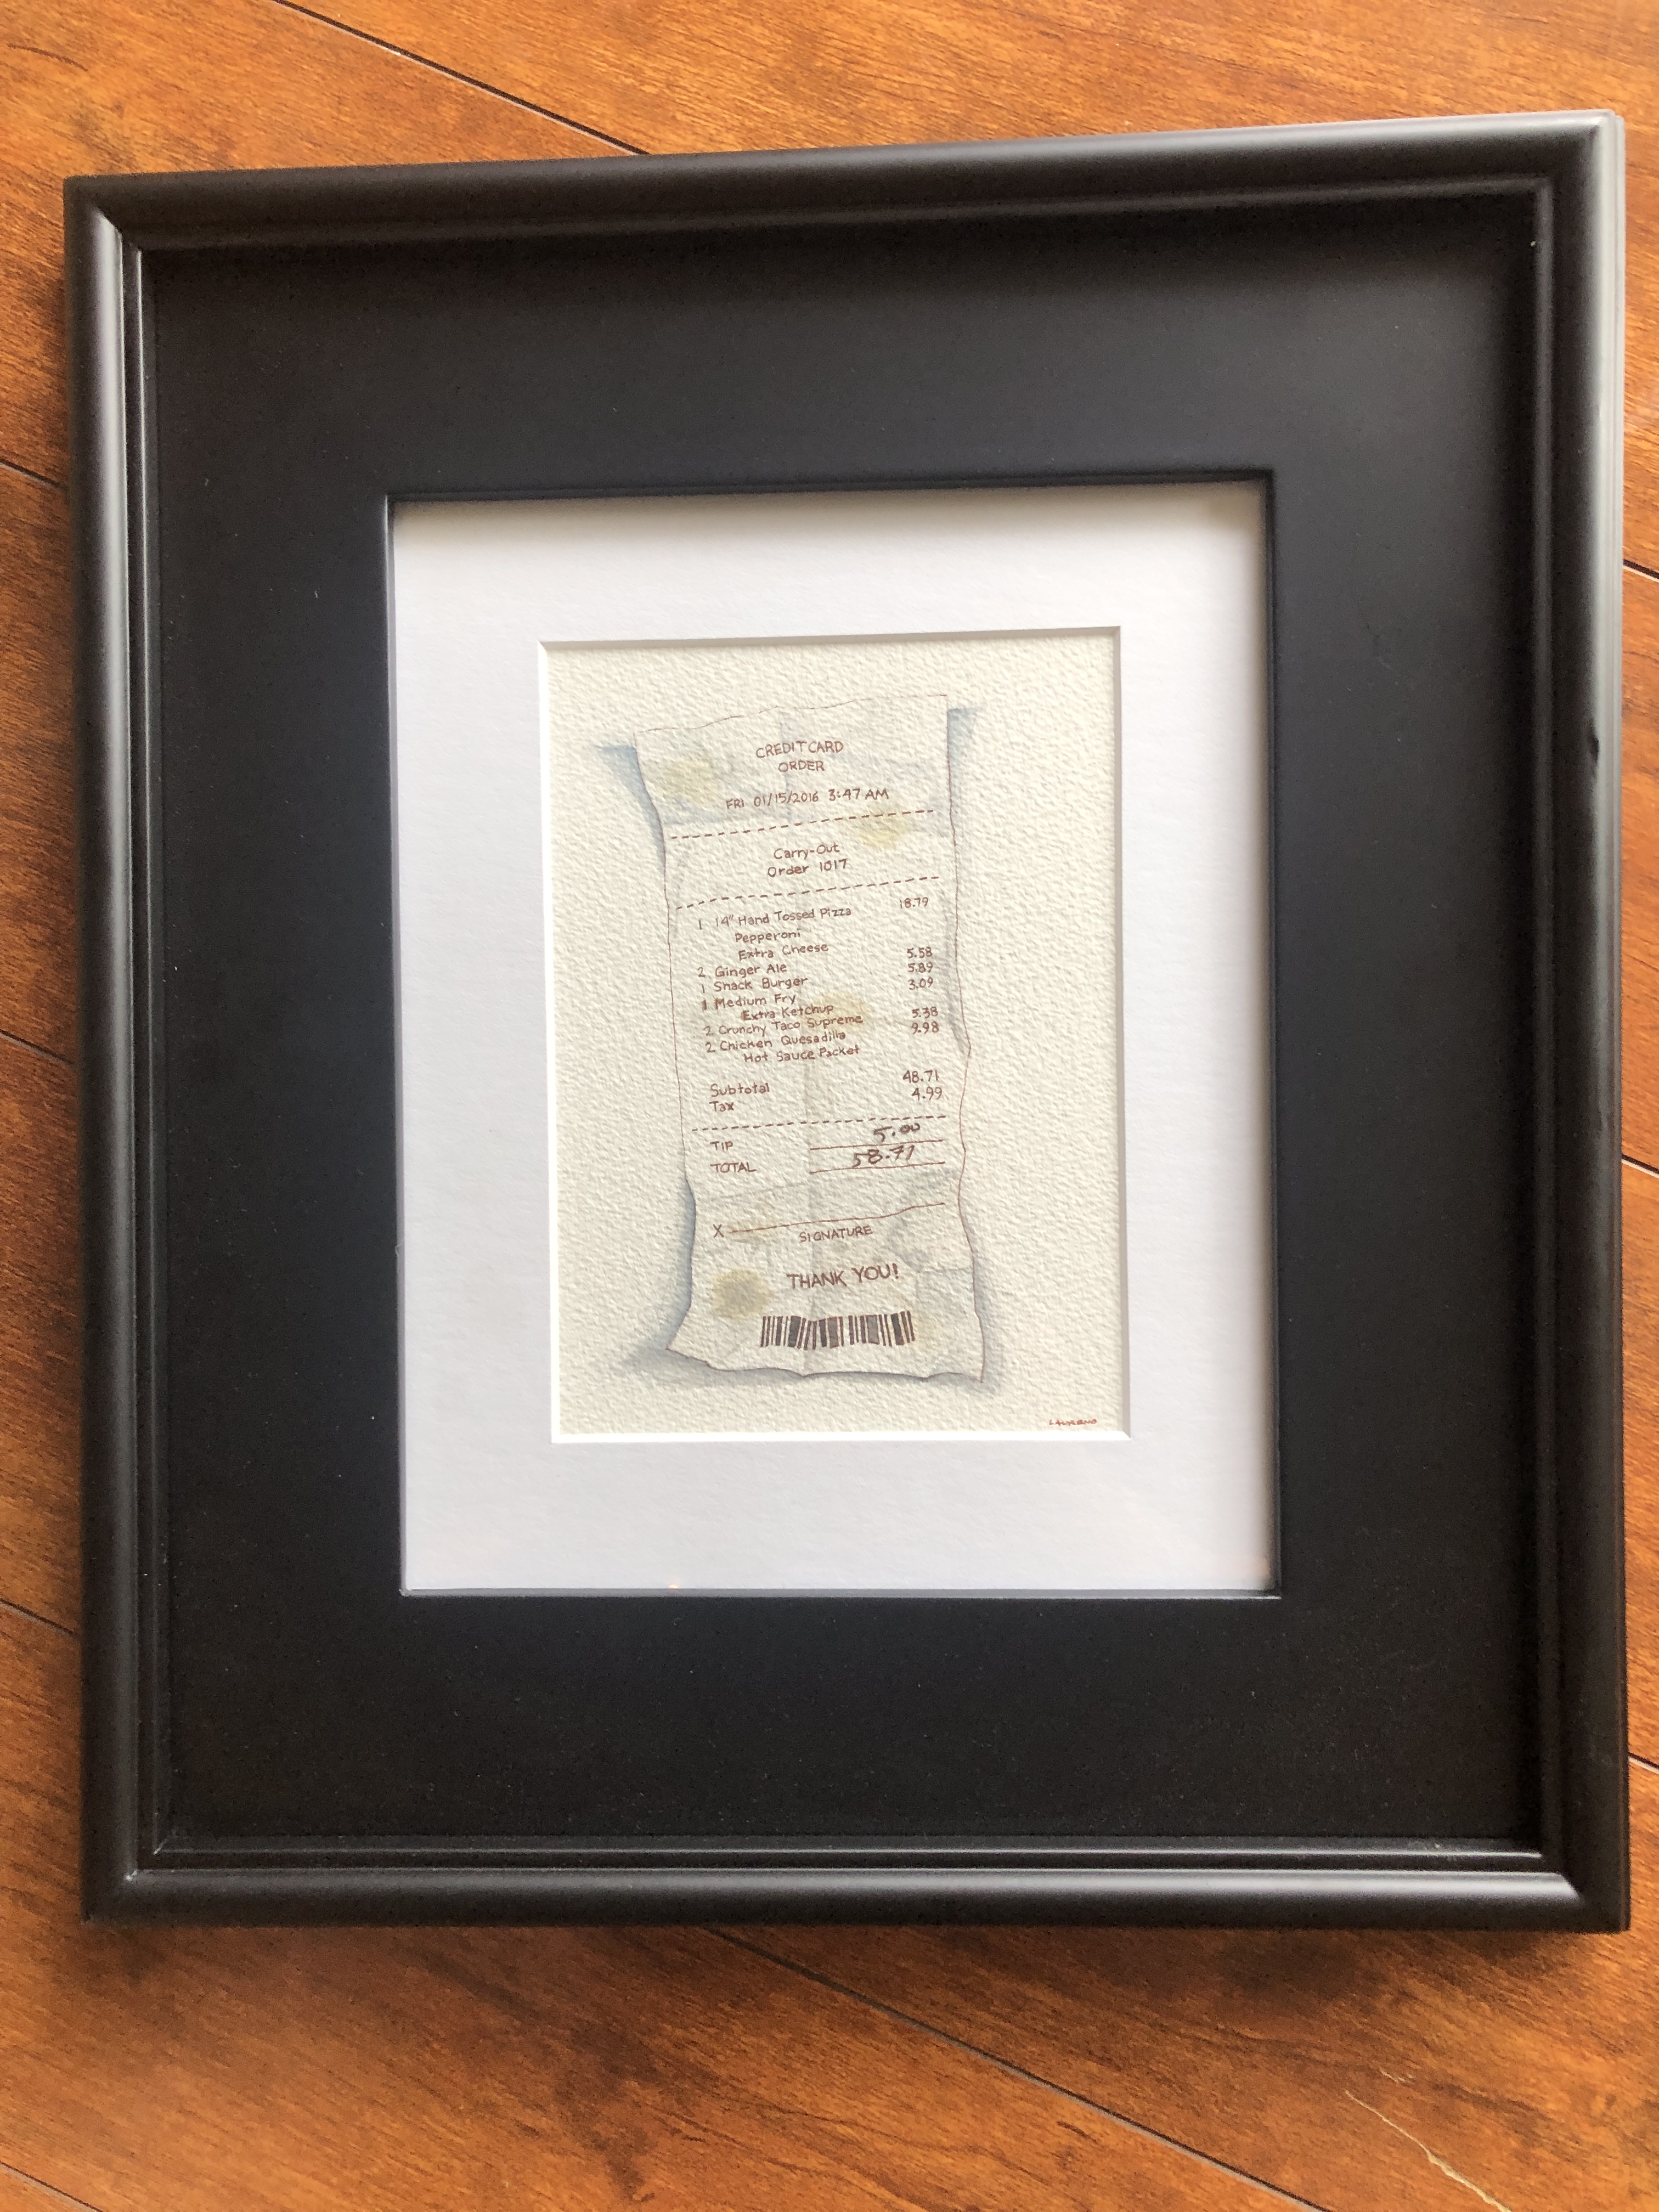 Maria Laureno's To-Go Order is a 2023 watercolor, depicting a receipt. Initially appearing to be a simple black and white design, other subtle hues are visible when the image is studied more closely.